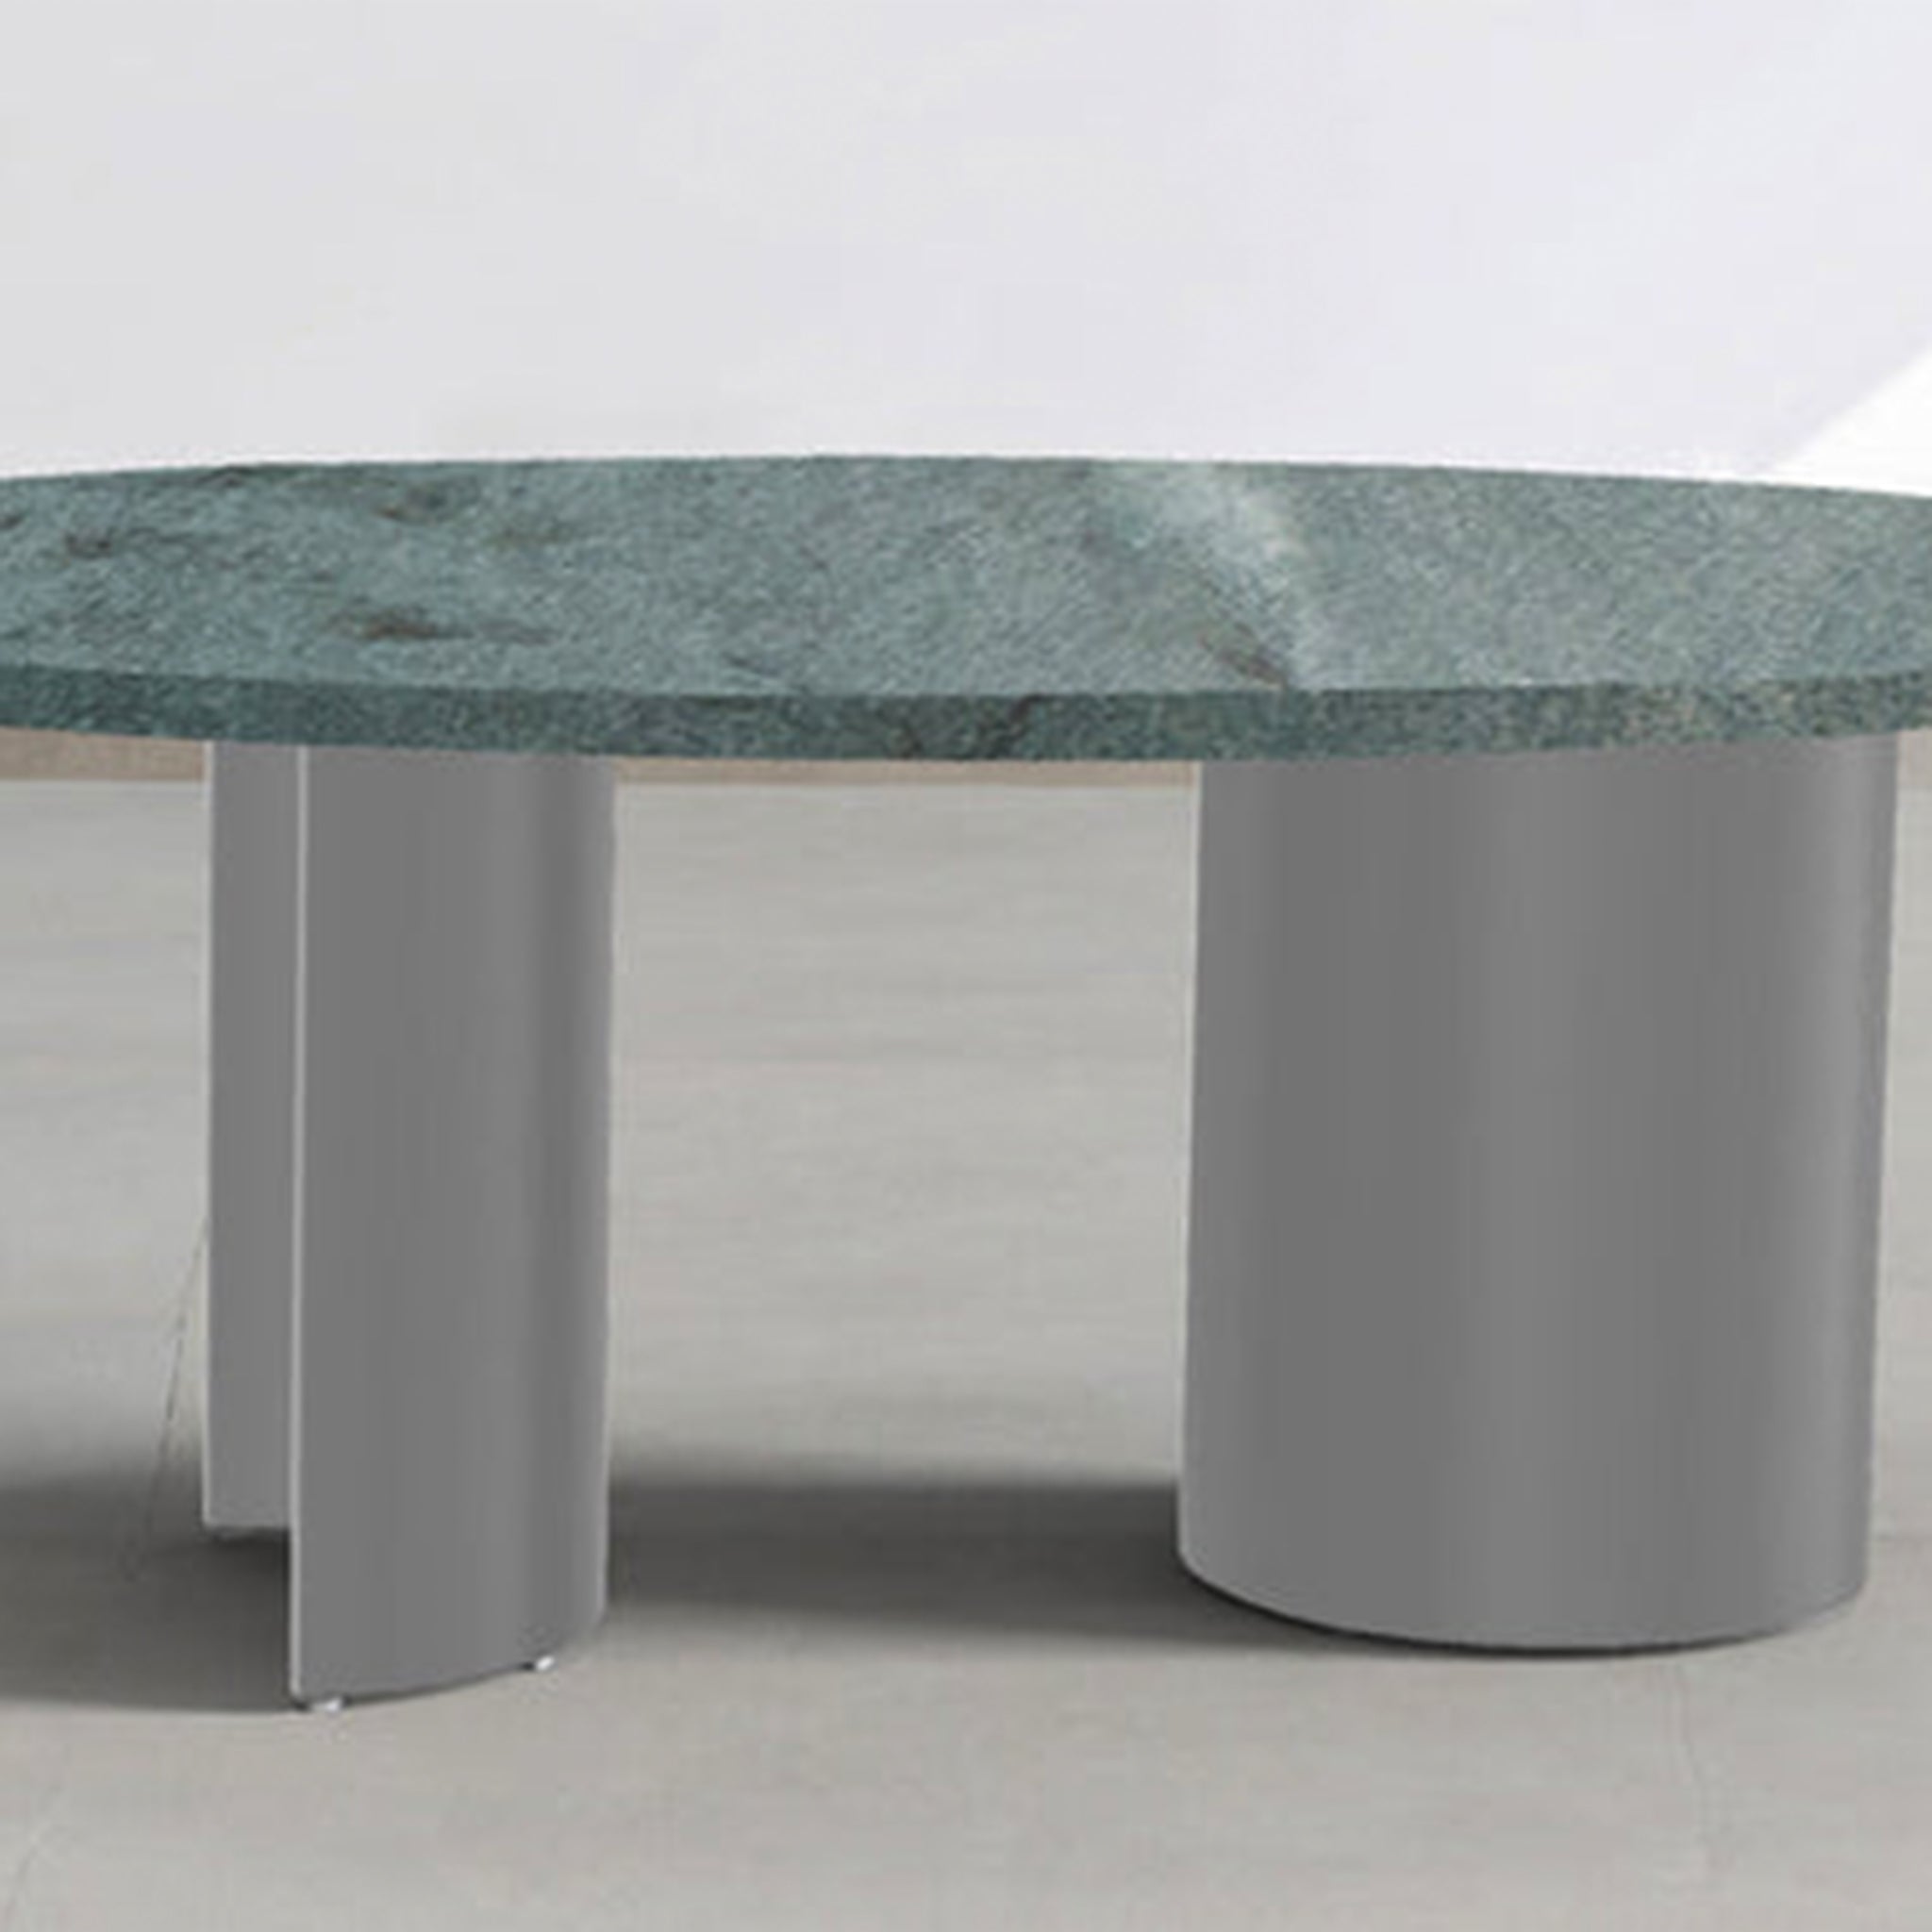 Diameter 100cm Coffee Table: Spacious top perfect for displaying coffee table books and decor.